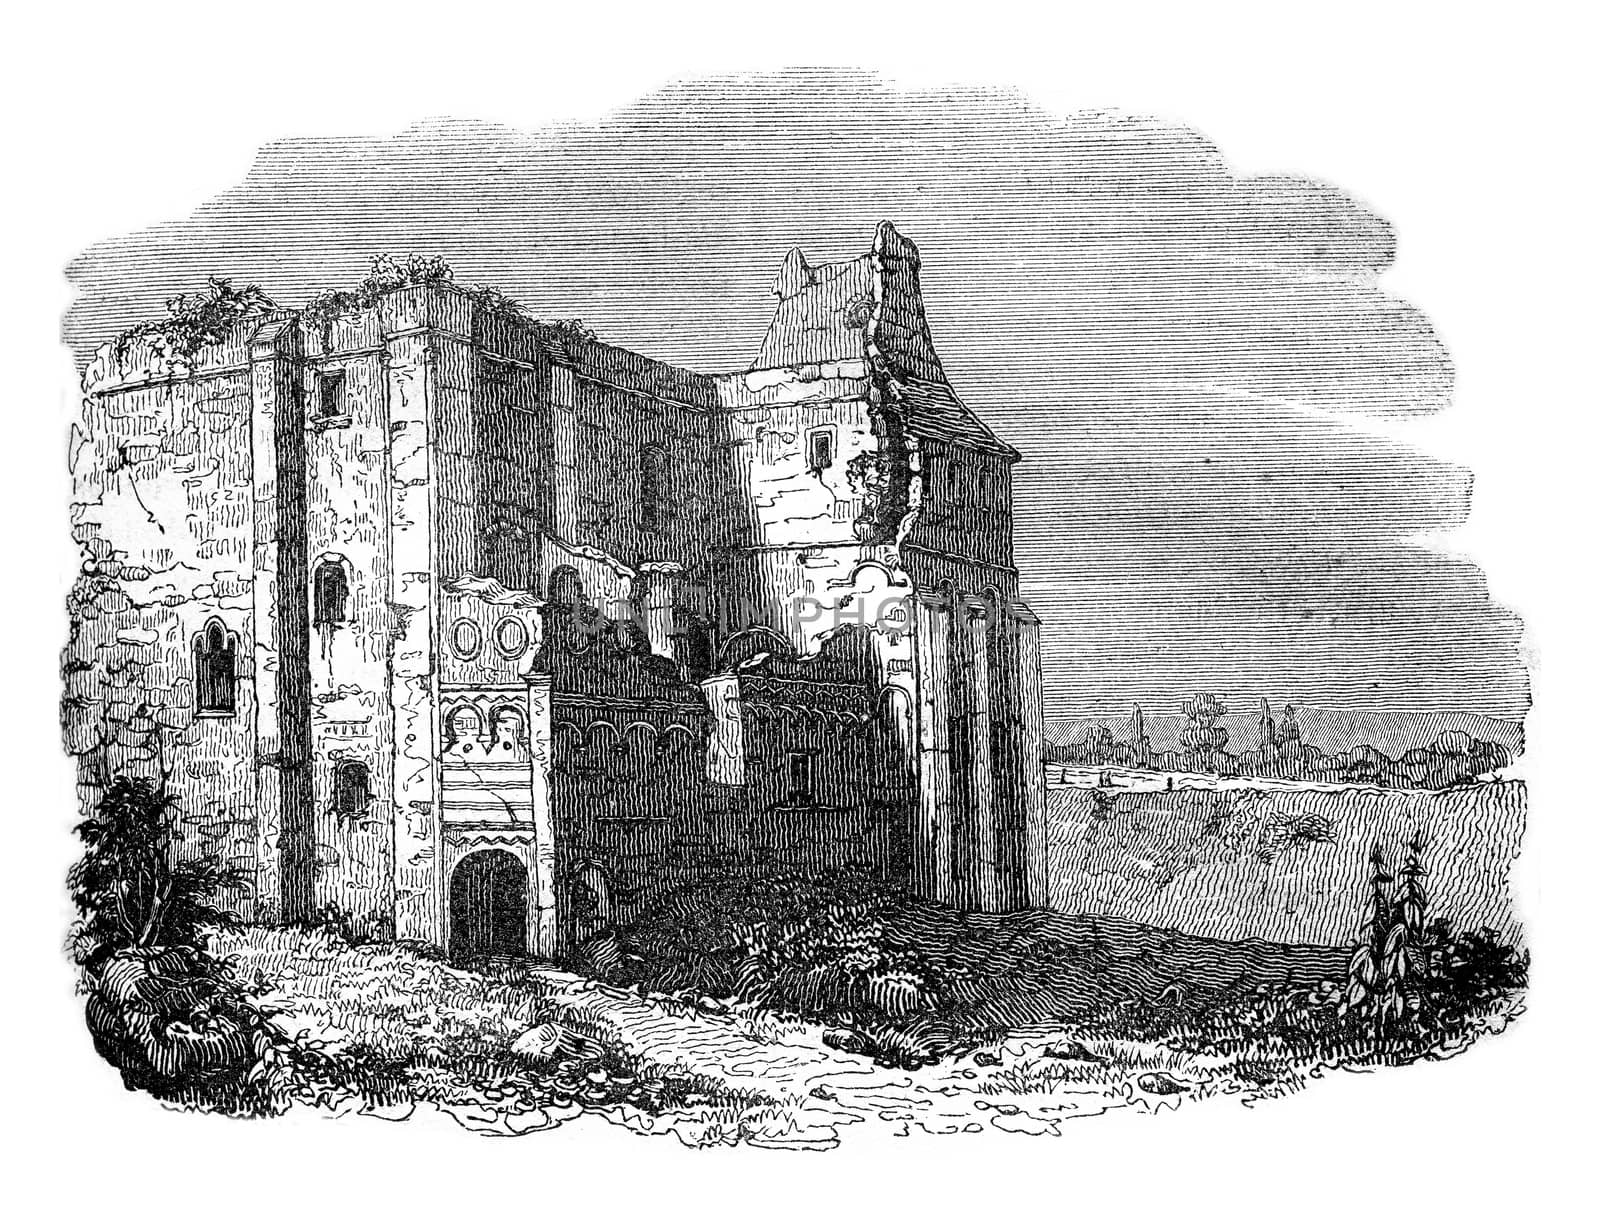 Castle Rising, owned Stigand, vintage engraved illustration. Colorful History of England, 1837.
